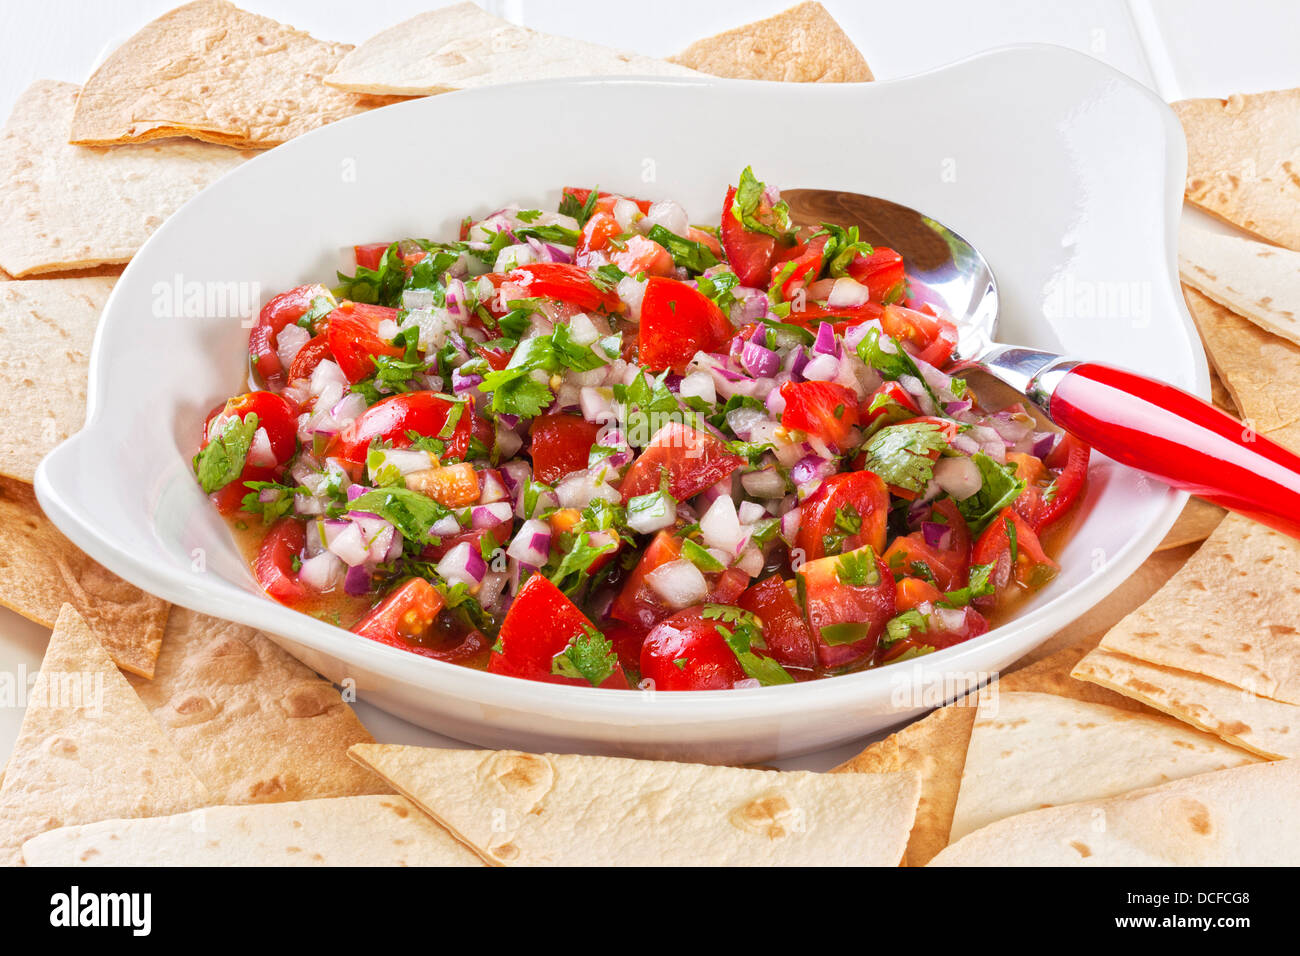 Pico de gallo, or salsa fresca, is a fresh, uncooked relish in Mexican cuisine, made from tomatoes, red onion, chilli, olive... Stock Photo